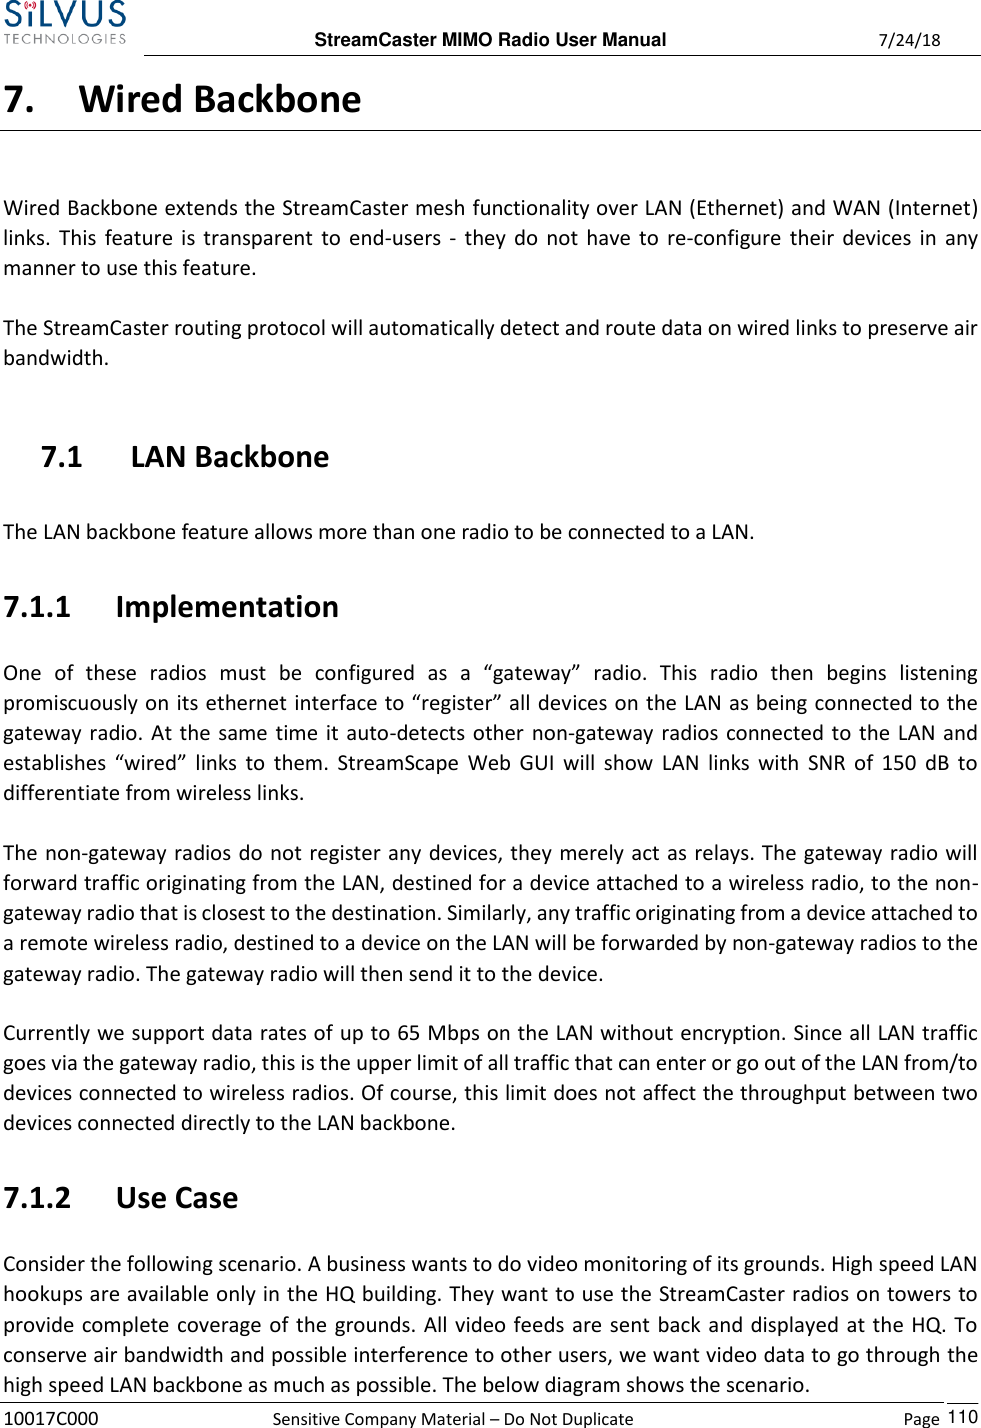  StreamCaster MIMO Radio User Manual  7/24/18 10017C000  Sensitive Company Material – Do Not Duplicate    Page    110 7. Wired Backbone Wired Backbone extends the StreamCaster mesh functionality over LAN (Ethernet) and WAN (Internet) links. This feature is transparent to end-users - they do not have to  re-configure their devices in any manner to use this feature. The StreamCaster routing protocol will automatically detect and route data on wired links to preserve air bandwidth. 7.1 LAN Backbone The LAN backbone feature allows more than one radio to be connected to a LAN. 7.1.1 Implementation One  of  these  radios  must  be  configured  as  a  “gateway”  radio.  This  radio  then  begins  listening promiscuously on its ethernet interface to “register” all devices on the LAN as being connected to the gateway radio. At the same time it auto-detects other non-gateway radios connected to the LAN and establishes “wired” links to them. StreamScape Web GUI will show  LAN links with  SNR of 150 dB to differentiate from wireless links. The non-gateway radios do not register any devices, they merely act as relays. The gateway radio will forward traffic originating from the LAN, destined for a device attached to a wireless radio, to the non-gateway radio that is closest to the destination. Similarly, any traffic originating from a device attached to a remote wireless radio, destined to a device on the LAN will be forwarded by non-gateway radios to the gateway radio. The gateway radio will then send it to the device. Currently we support data rates of up to 65 Mbps on the LAN without encryption. Since all LAN traffic goes via the gateway radio, this is the upper limit of all traffic that can enter or go out of the LAN from/to devices connected to wireless radios. Of course, this limit does not affect the throughput between two devices connected directly to the LAN backbone. 7.1.2 Use Case Consider the following scenario. A business wants to do video monitoring of its grounds. High speed LAN hookups are available only in the HQ building. They want to use the StreamCaster radios on towers to provide complete coverage of the grounds. All video feeds are sent back and displayed at the HQ. To conserve air bandwidth and possible interference to other users, we want video data to go through the high speed LAN backbone as much as possible. The below diagram shows the scenario. 